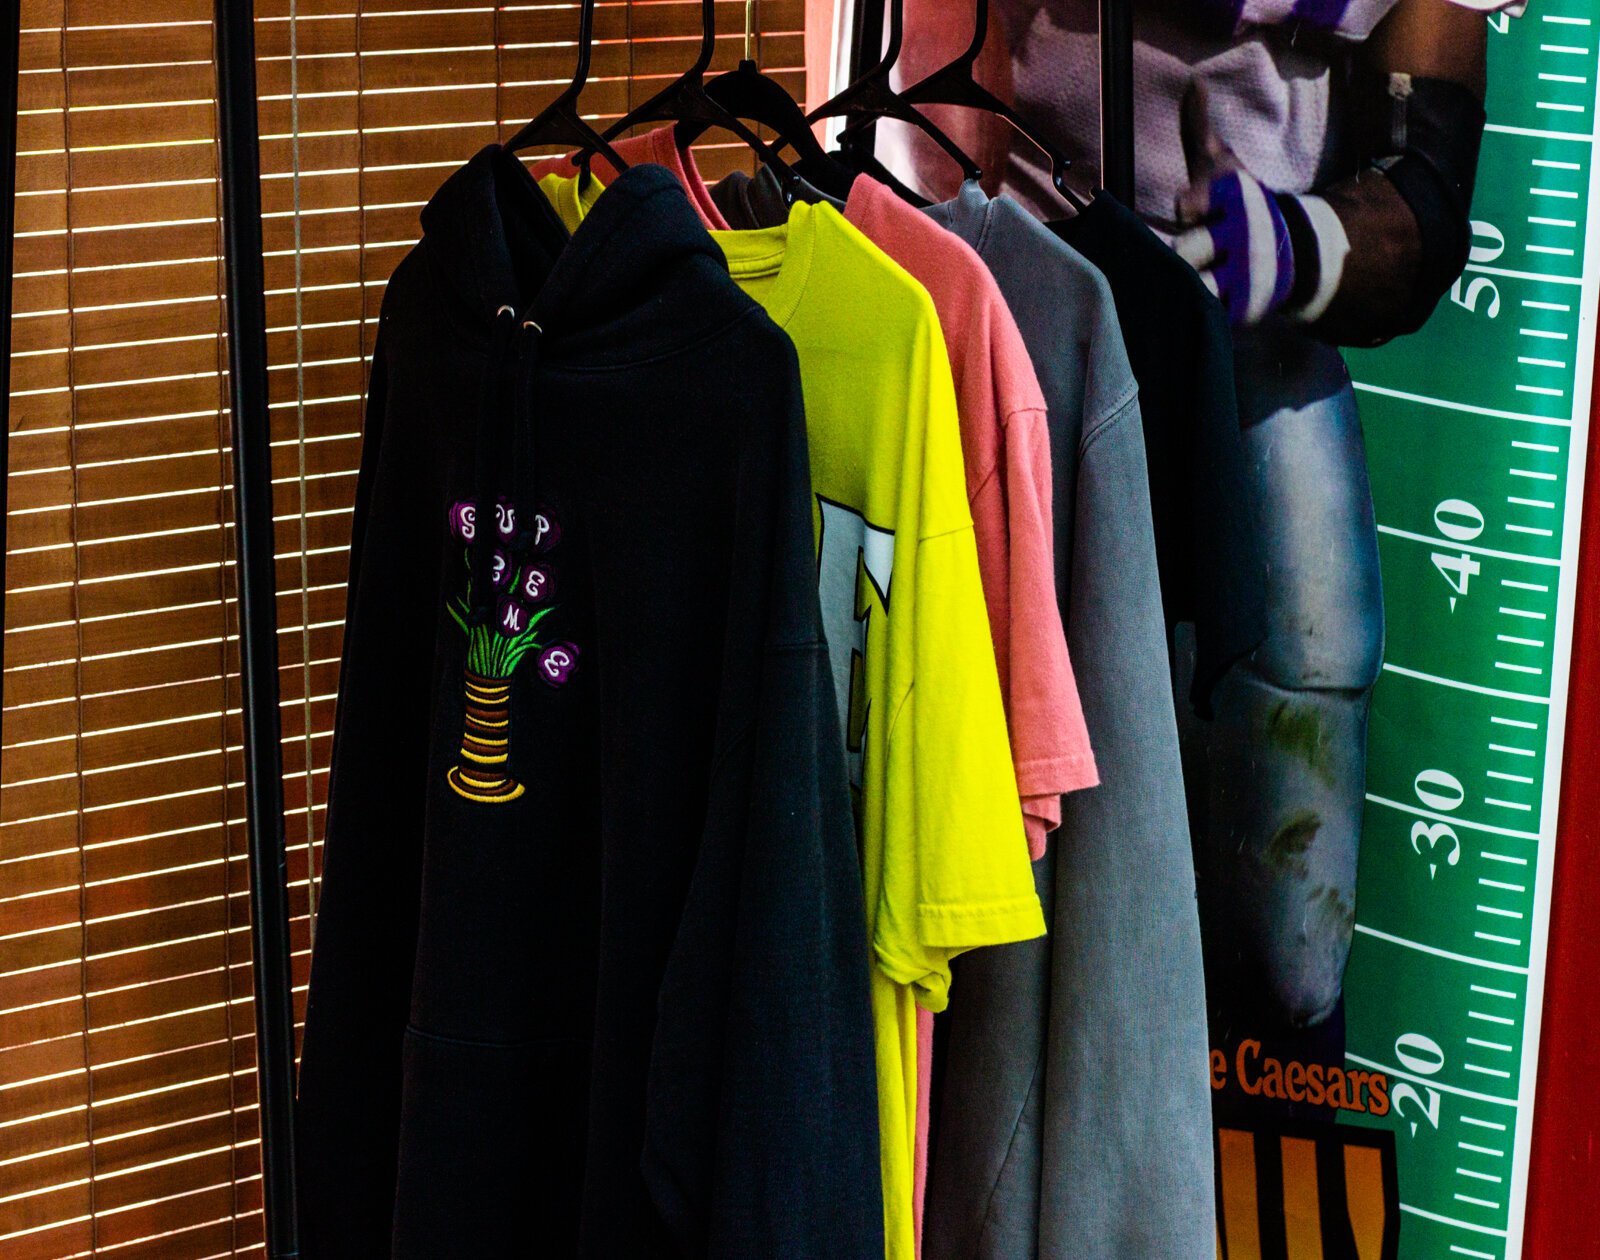 Deadstock Vintage sells a colorful assortment of sneakers, hats, tees, jeans, jackets, and knits.